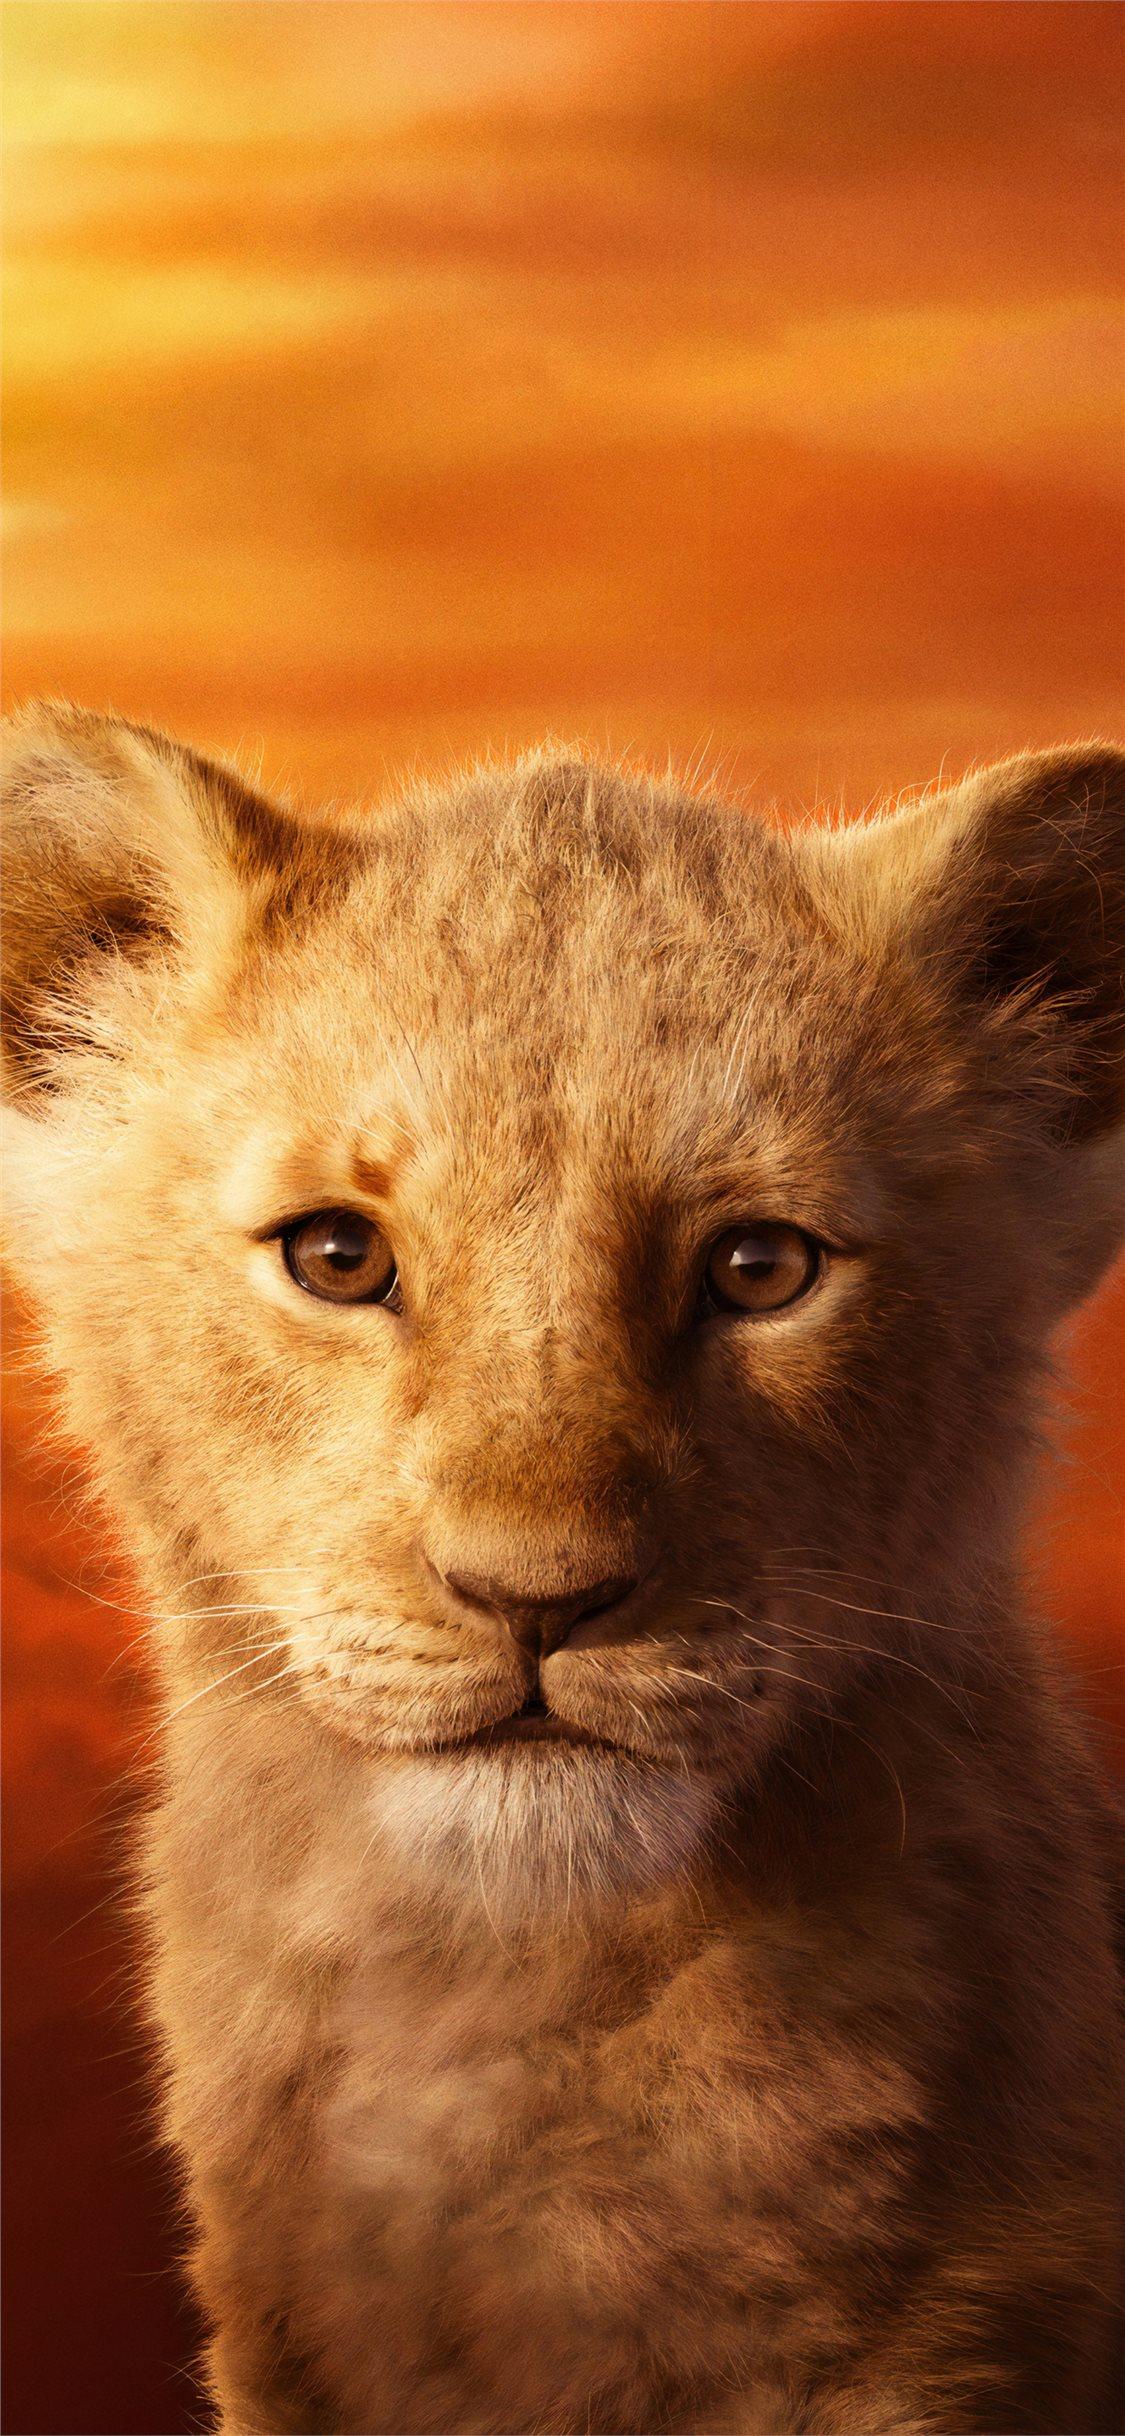 jd mccrary as simba the lion king 2019 4k iPhone X Wallpaper Free